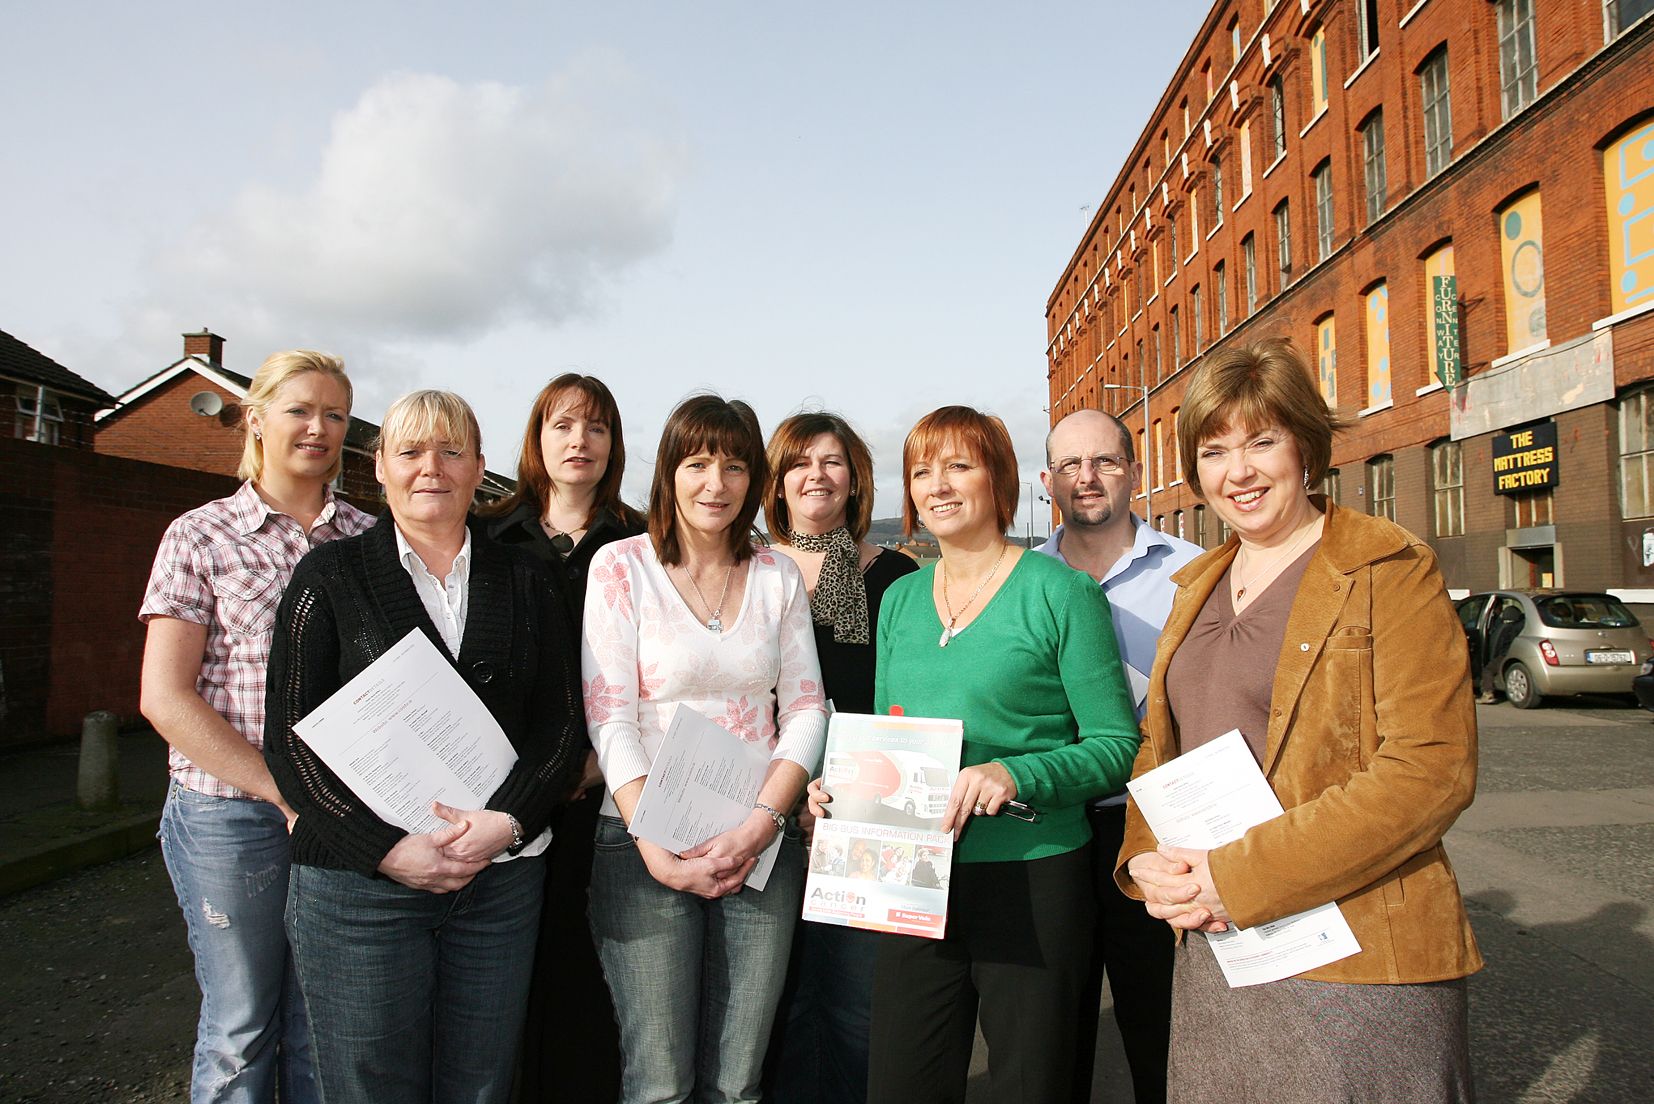 HANDS ACROSS PEACELINE: Flashback to 2007 and a previous project which united women in the Falls and Shankill - a cross-community health week in 2007